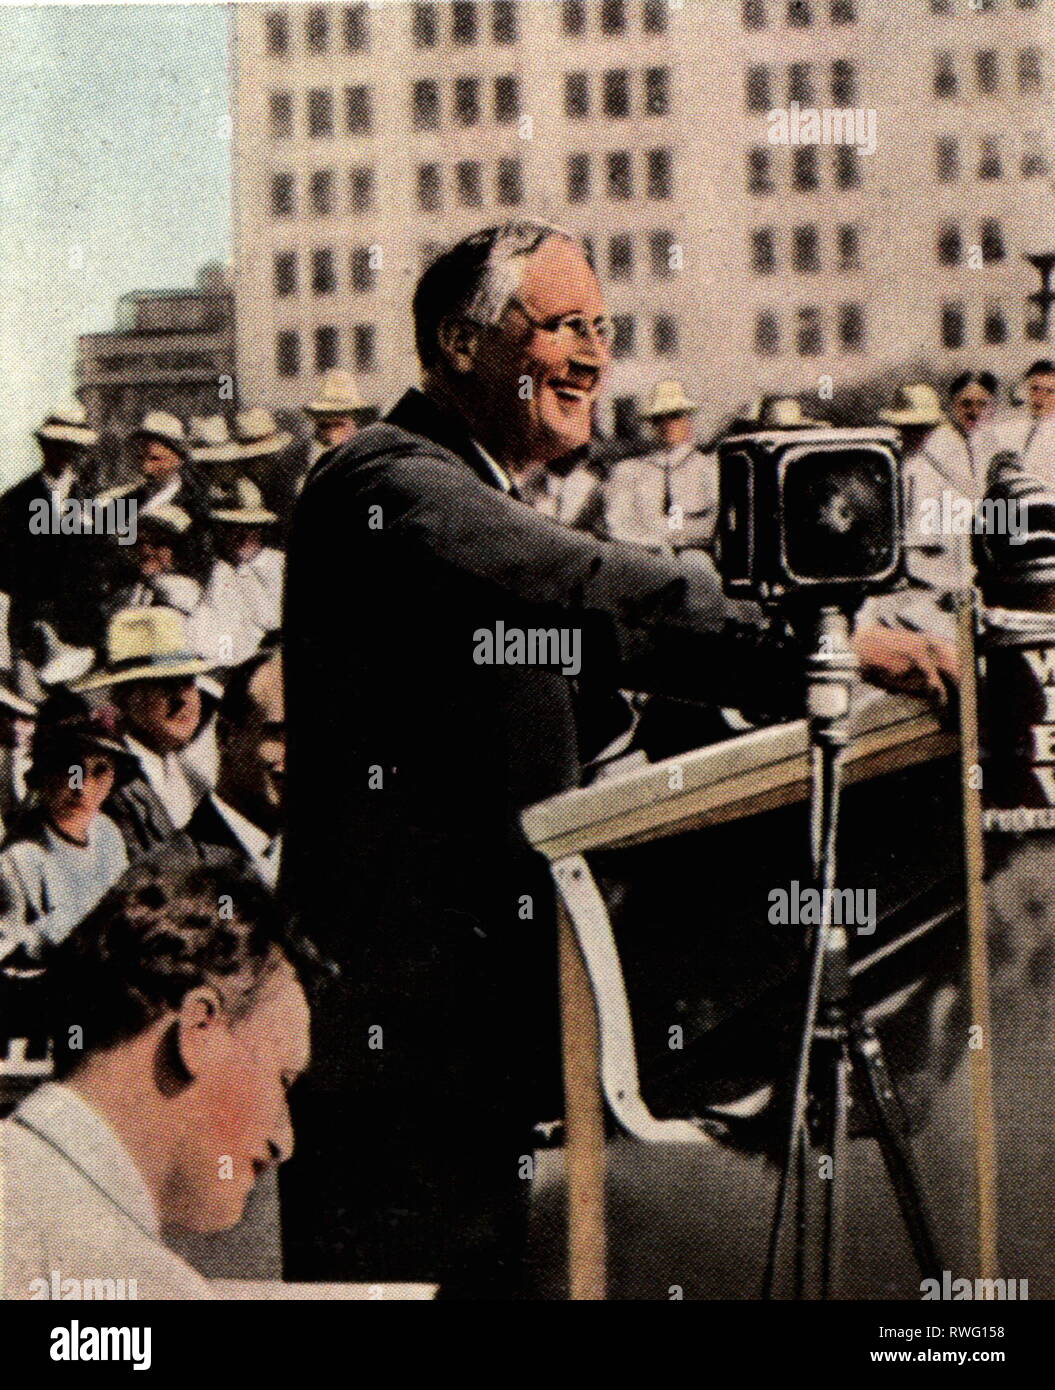 Roosevelt, Franklin Delano, 30.1.1882 - 12.4.1945, American politician (Dem.), half length, speech during of the presidential election campaign in Topeka, Kansas, 14.9.1932, coloured photograph, cigarette card, series 'Die Nachkriegszeit', 1935, Additional-Rights-Clearance-Info-Not-Available Stock Photo